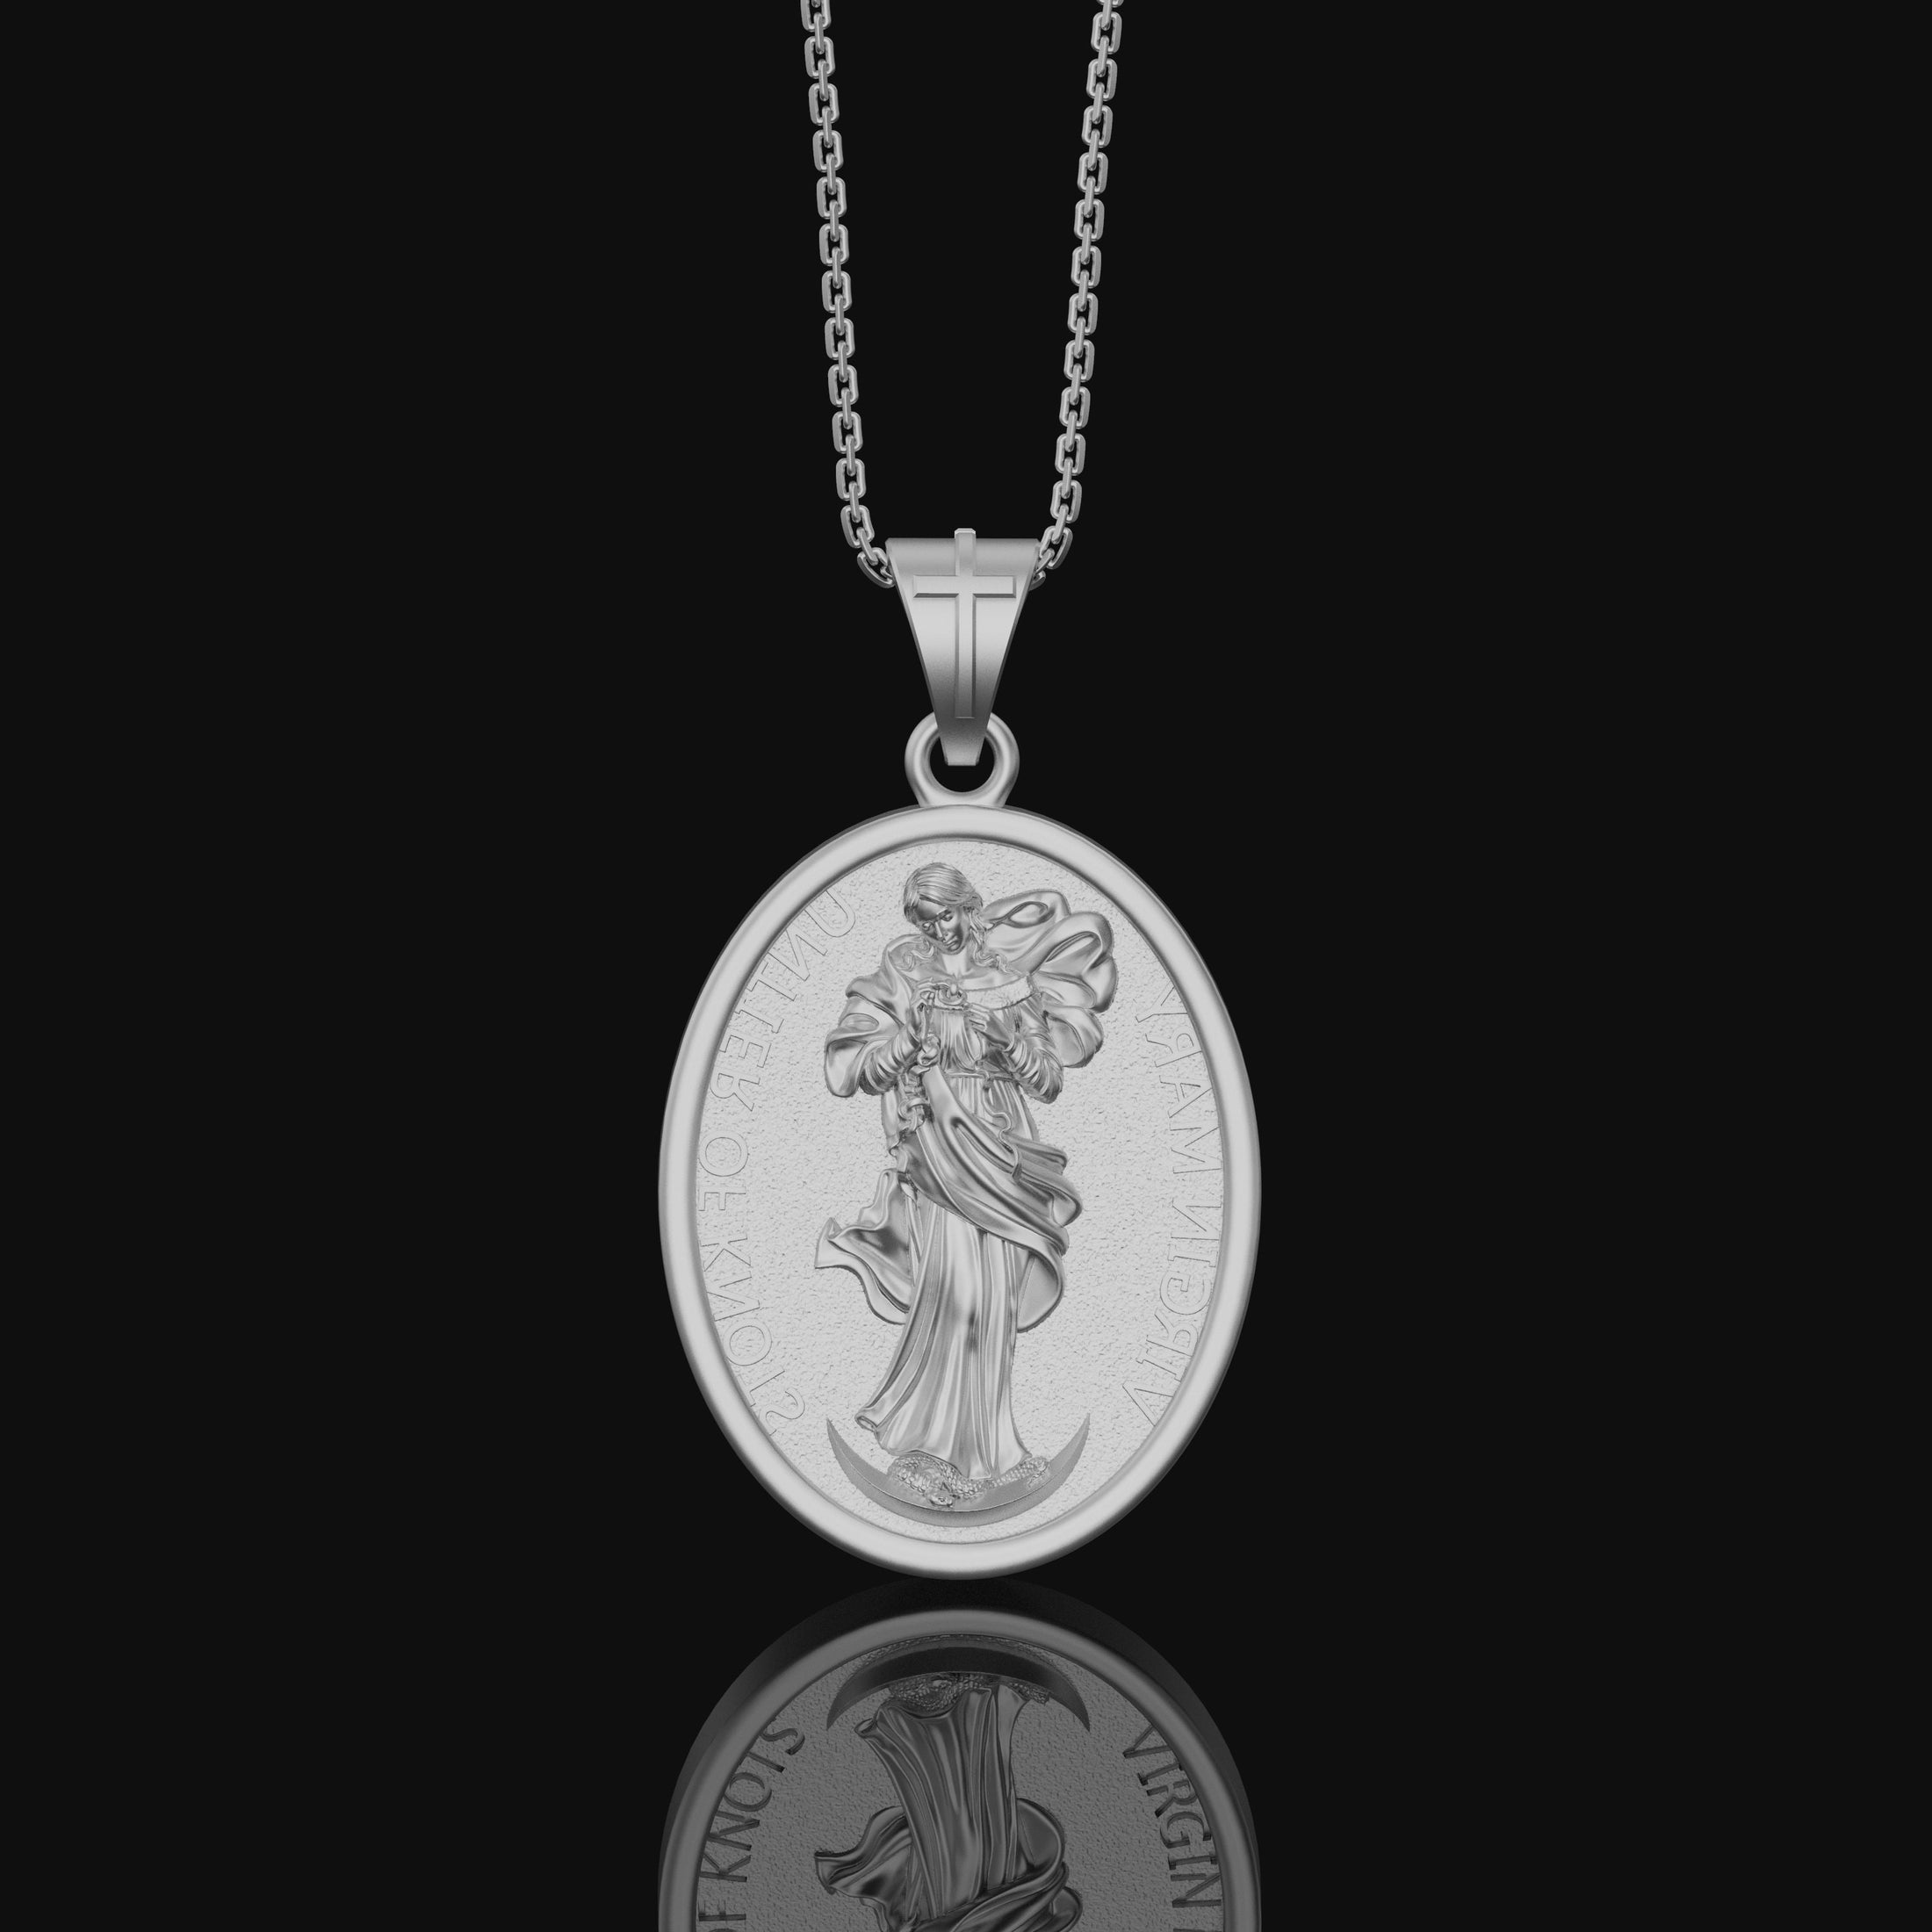 Mary Untier of Knots, Our Lady, Virgin Mary Medal, Virgin Mary, Catholic Gift, Catholic Medals, Confirmation Gift, Christian Jewelry Polished Finish